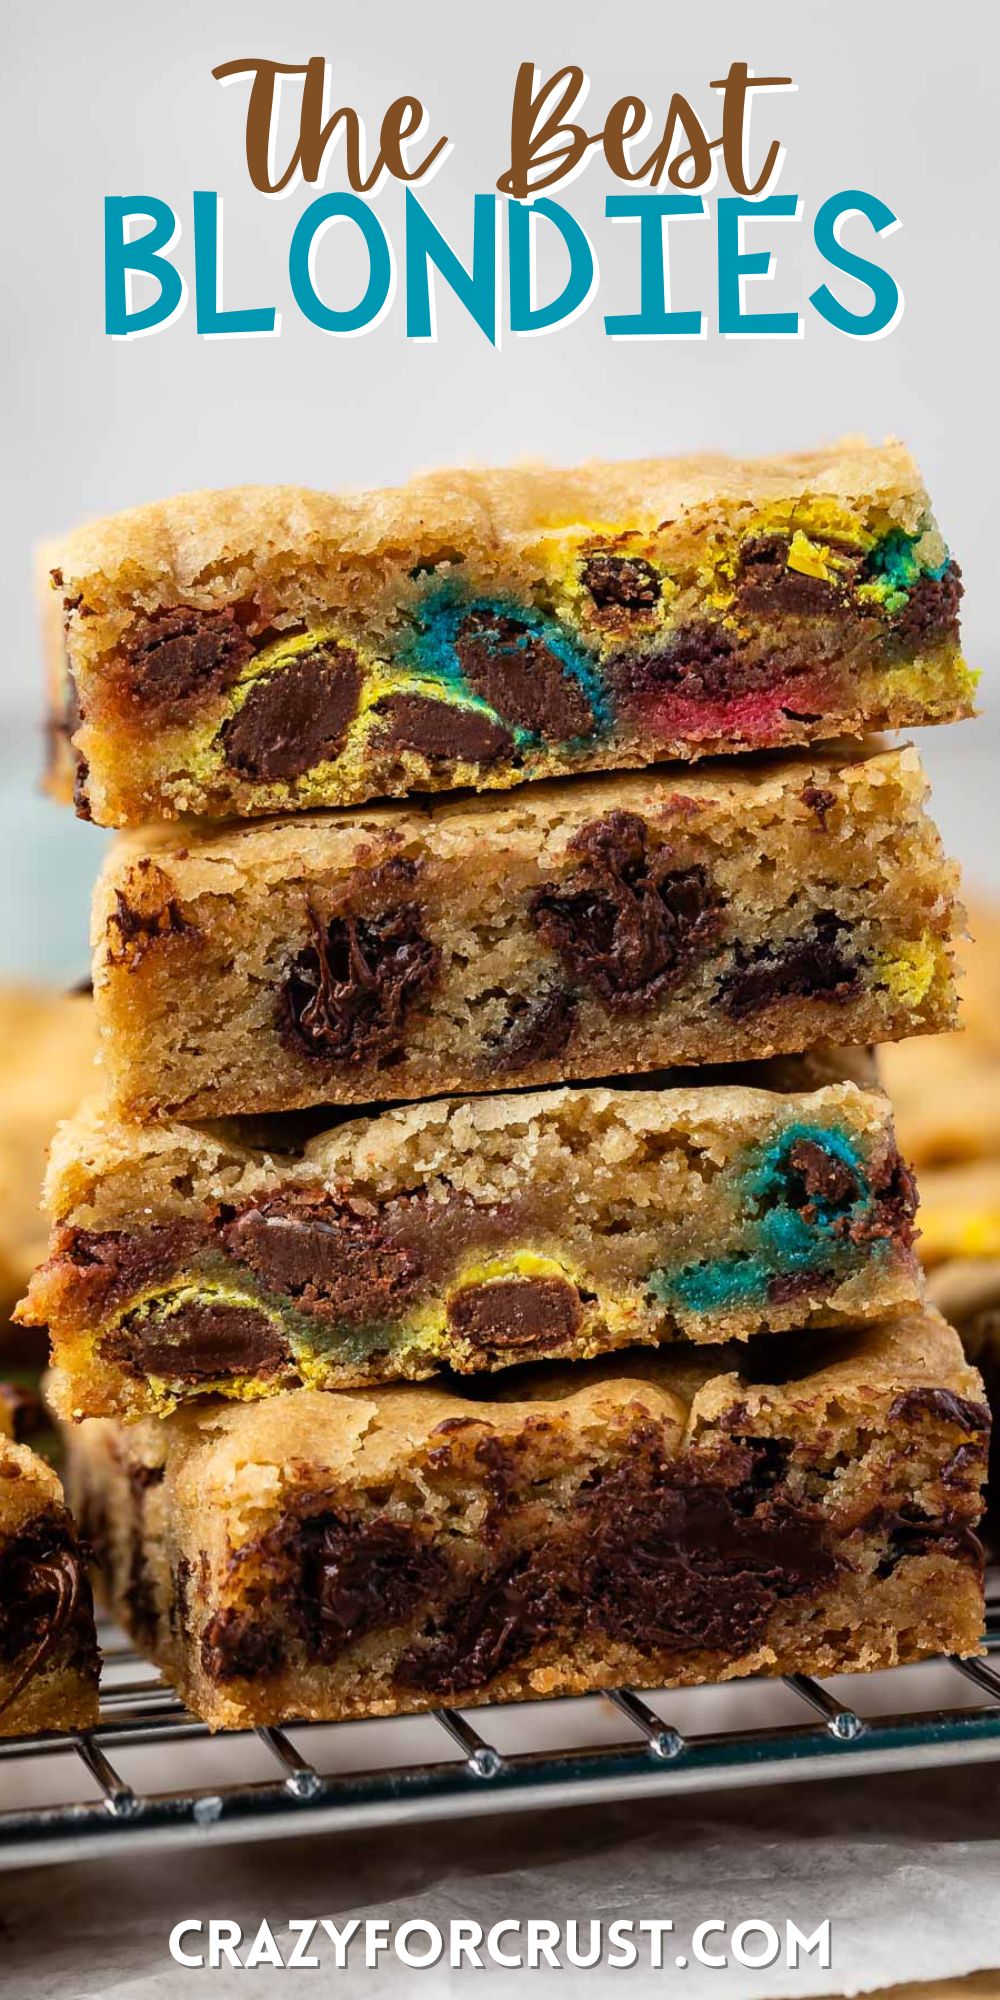 stacked blondies with m&ms baked in with words on the image.